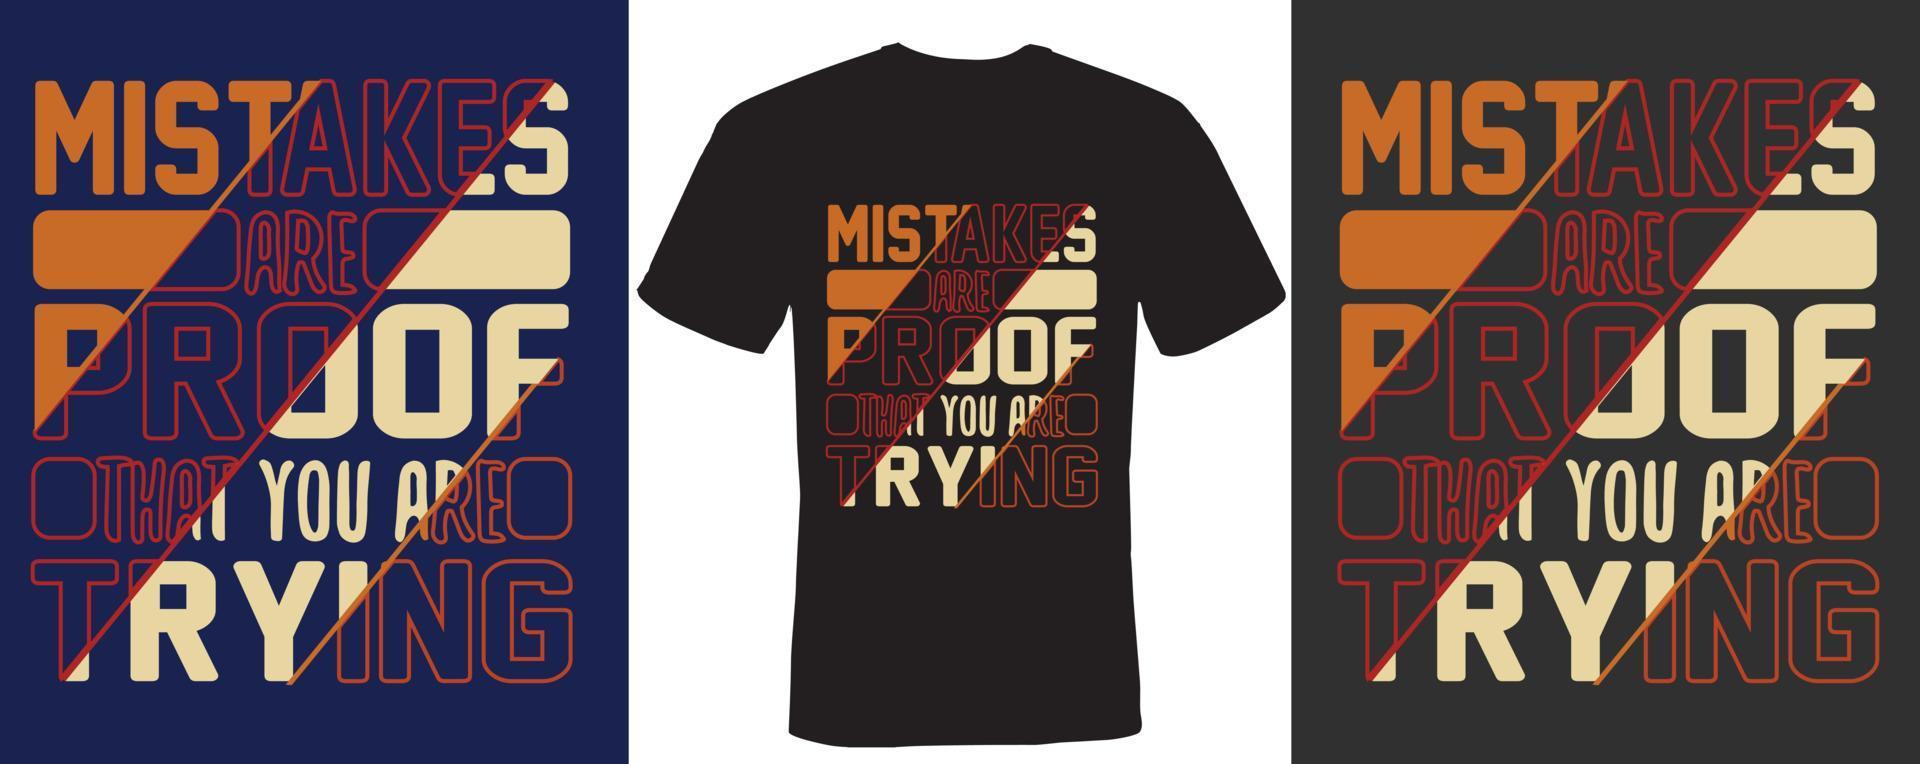 Mistakes are proof that you are trying t-shirt design vector